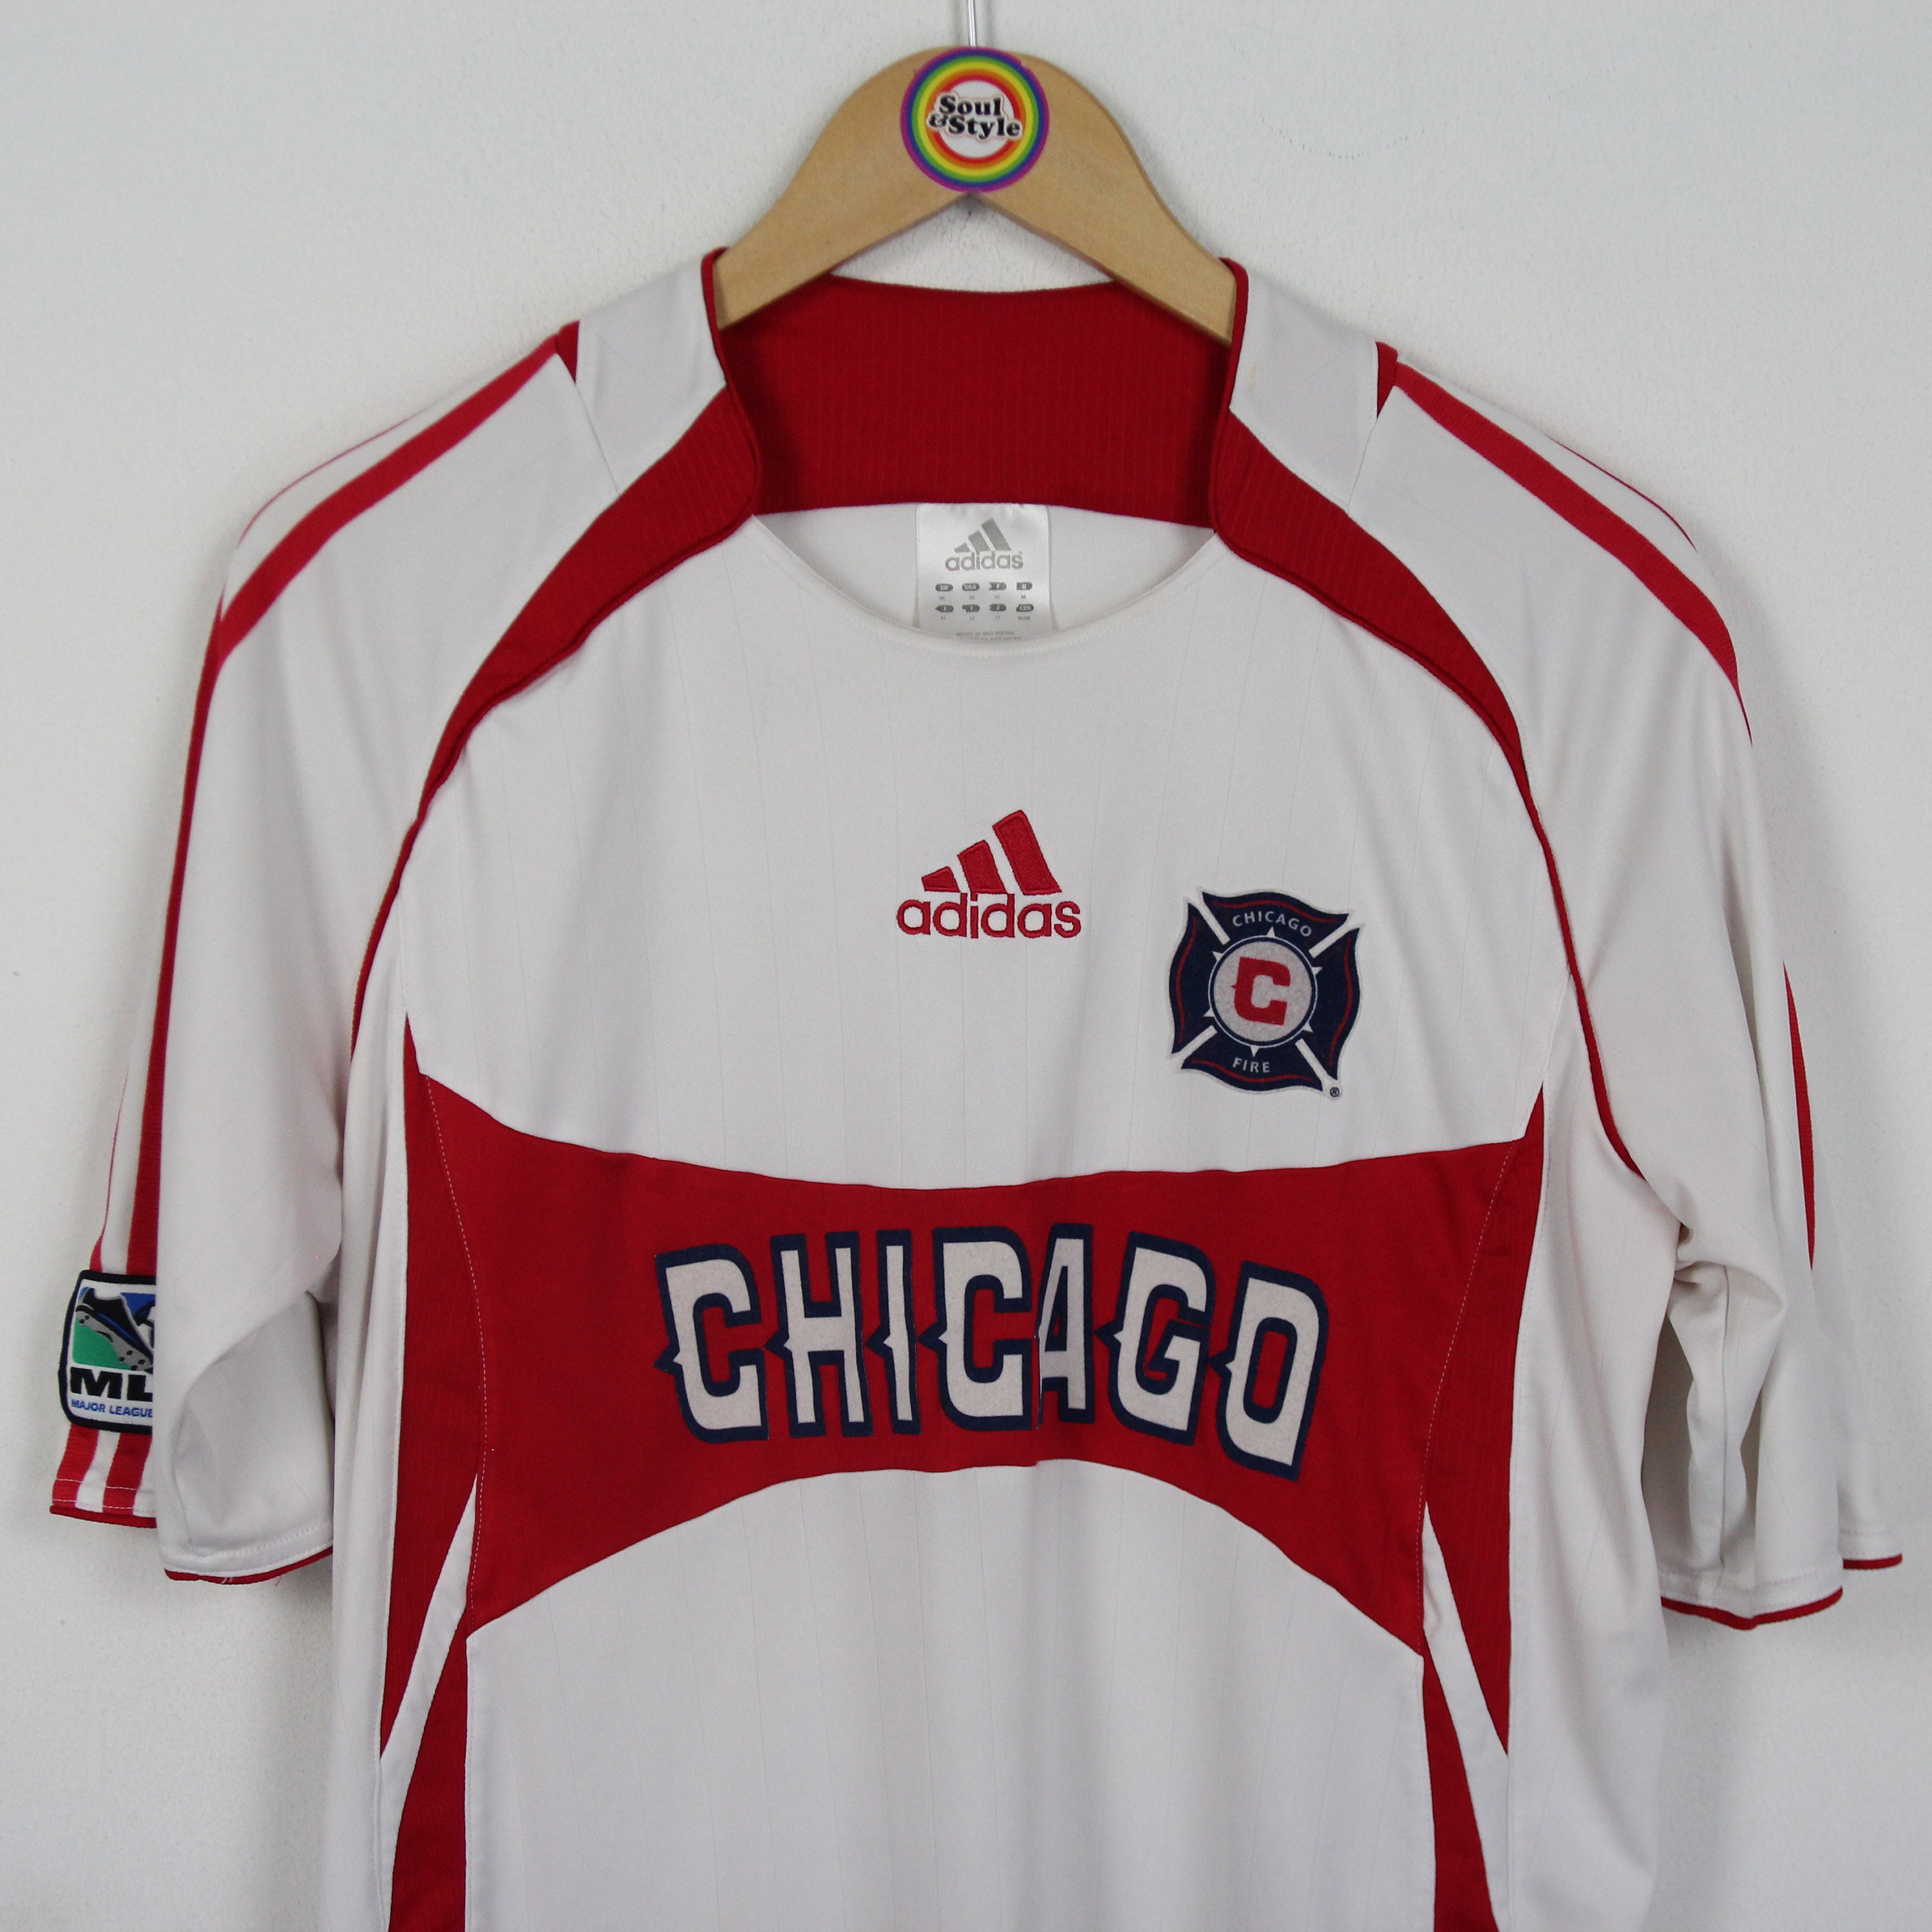 Vintage T-Shirt Jersey Size M Chicago Fire 2006 2007